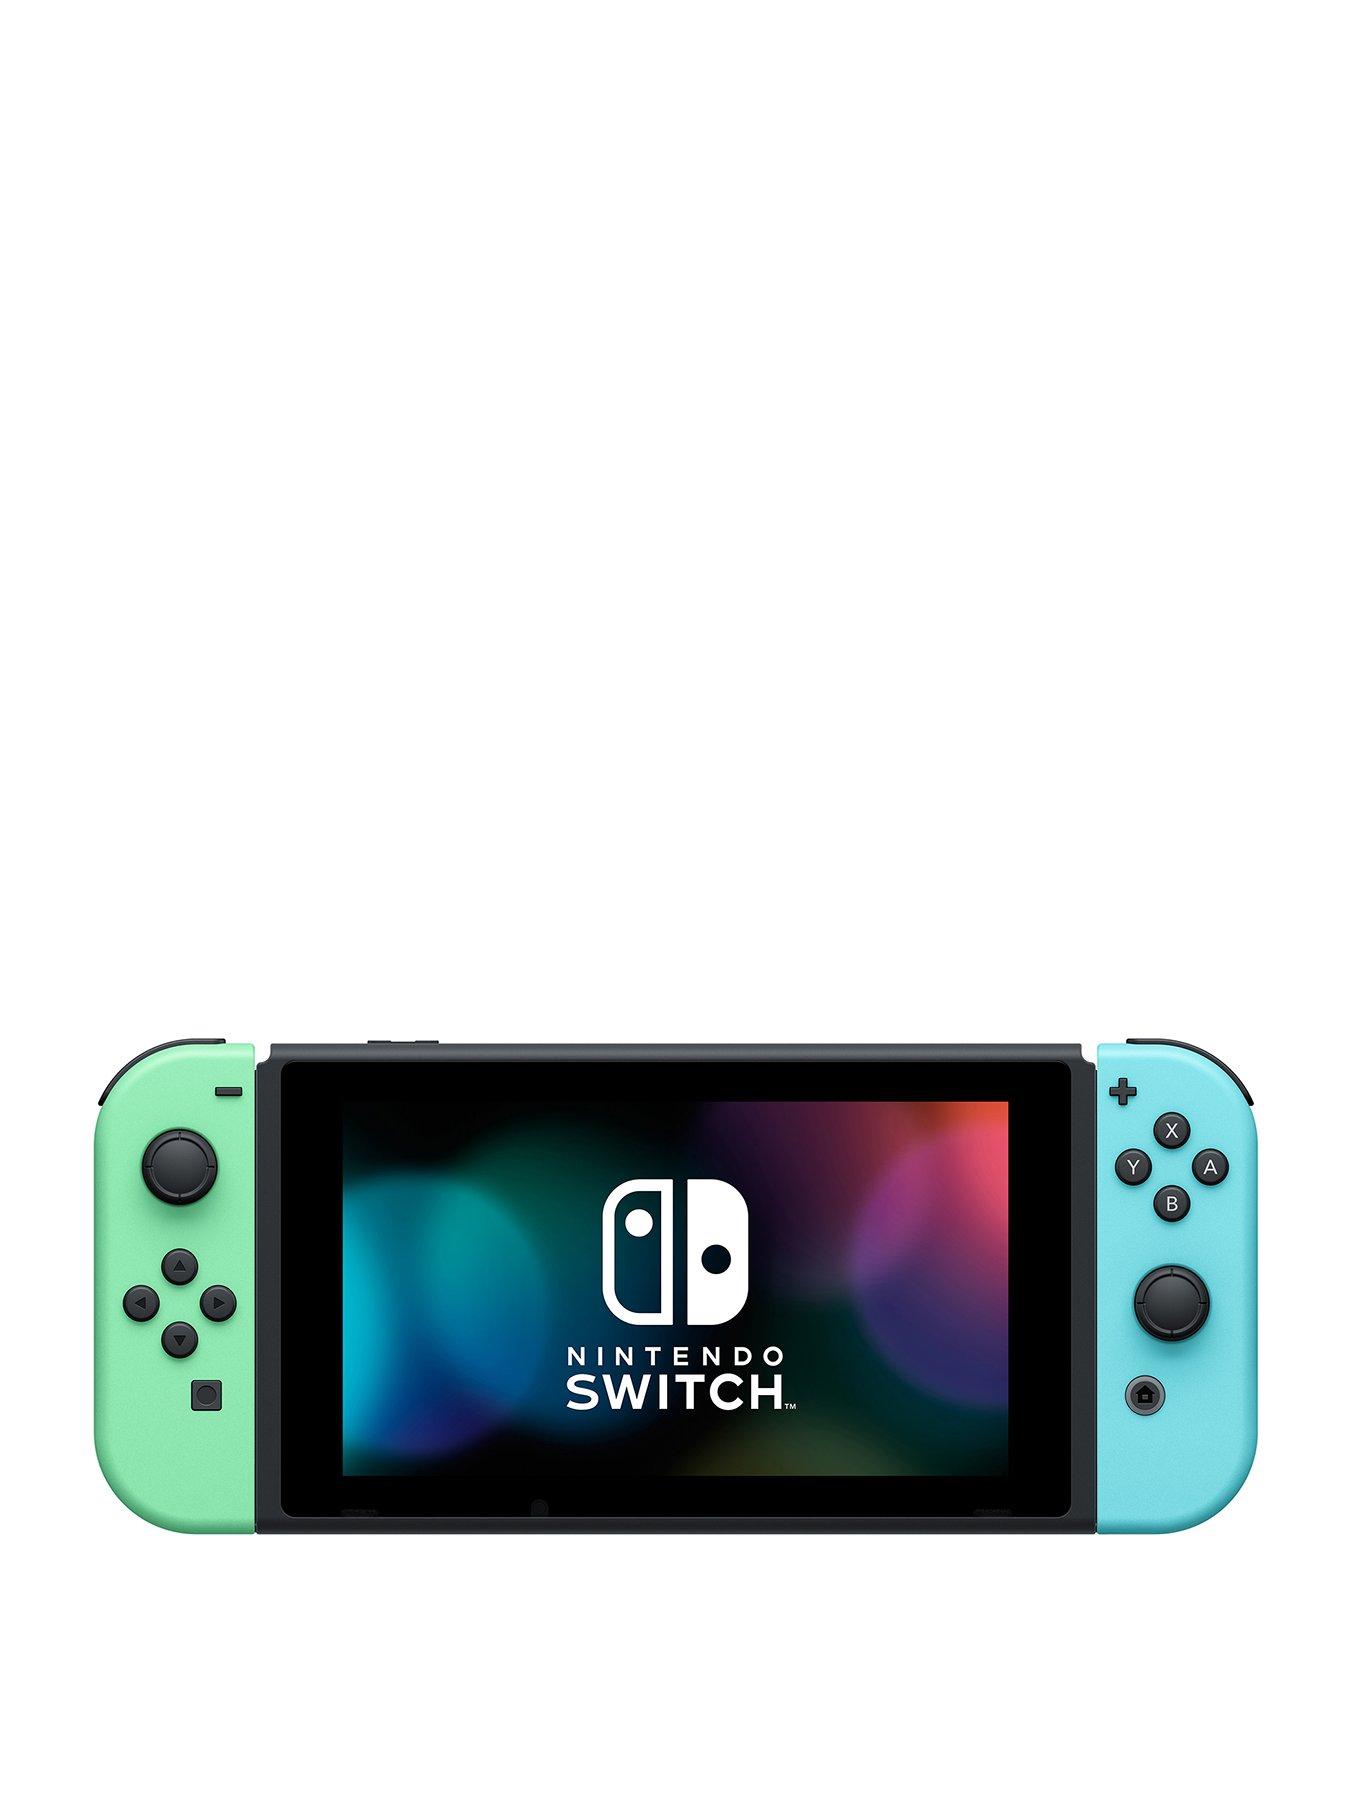 more animal crossing switch consoles